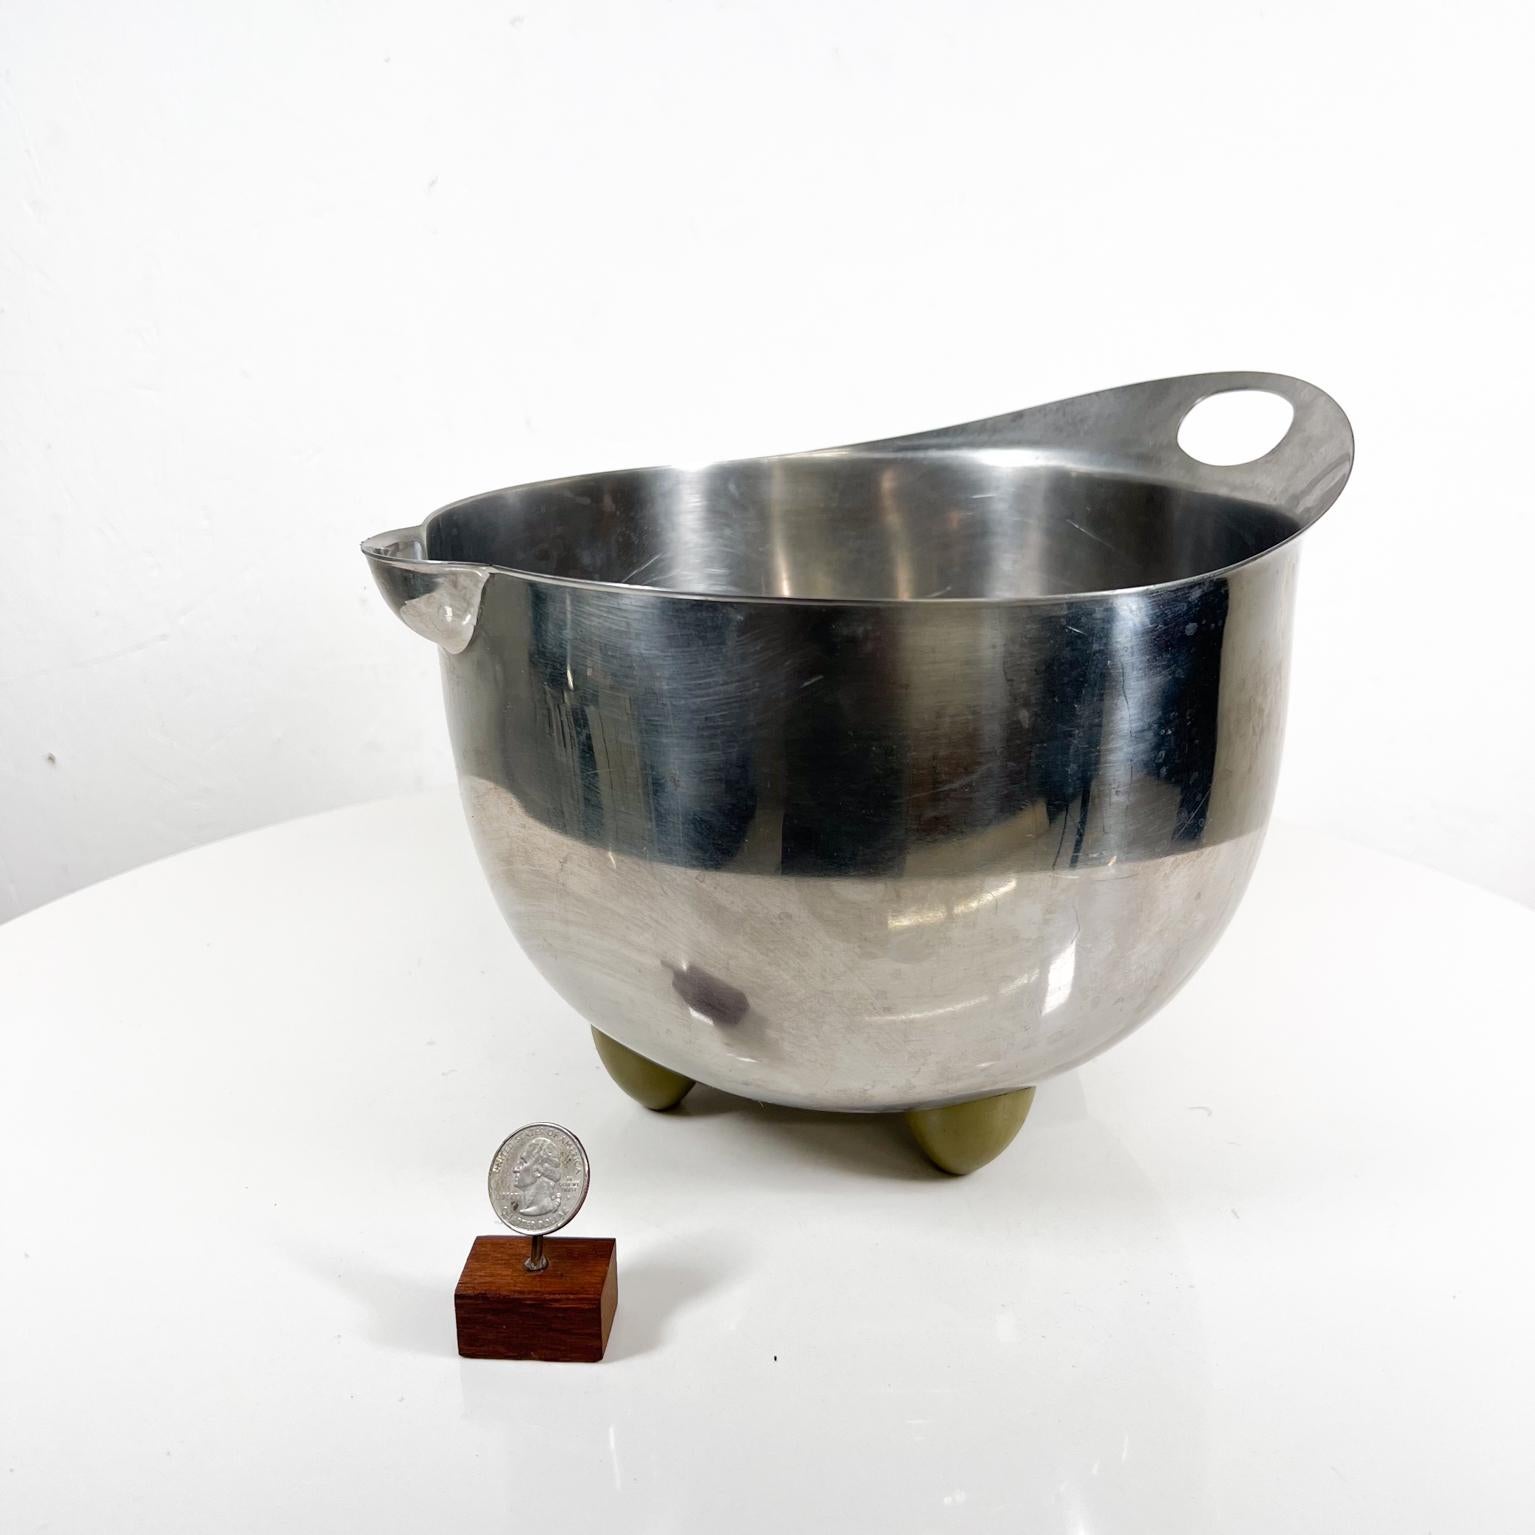 Michael Graves Design Stainless Steel Mixing Bowl 1985
10.13 D x 9.75 W x 6.5 H
Taiwan 
Signed
Original preowned condition, refer to images.



